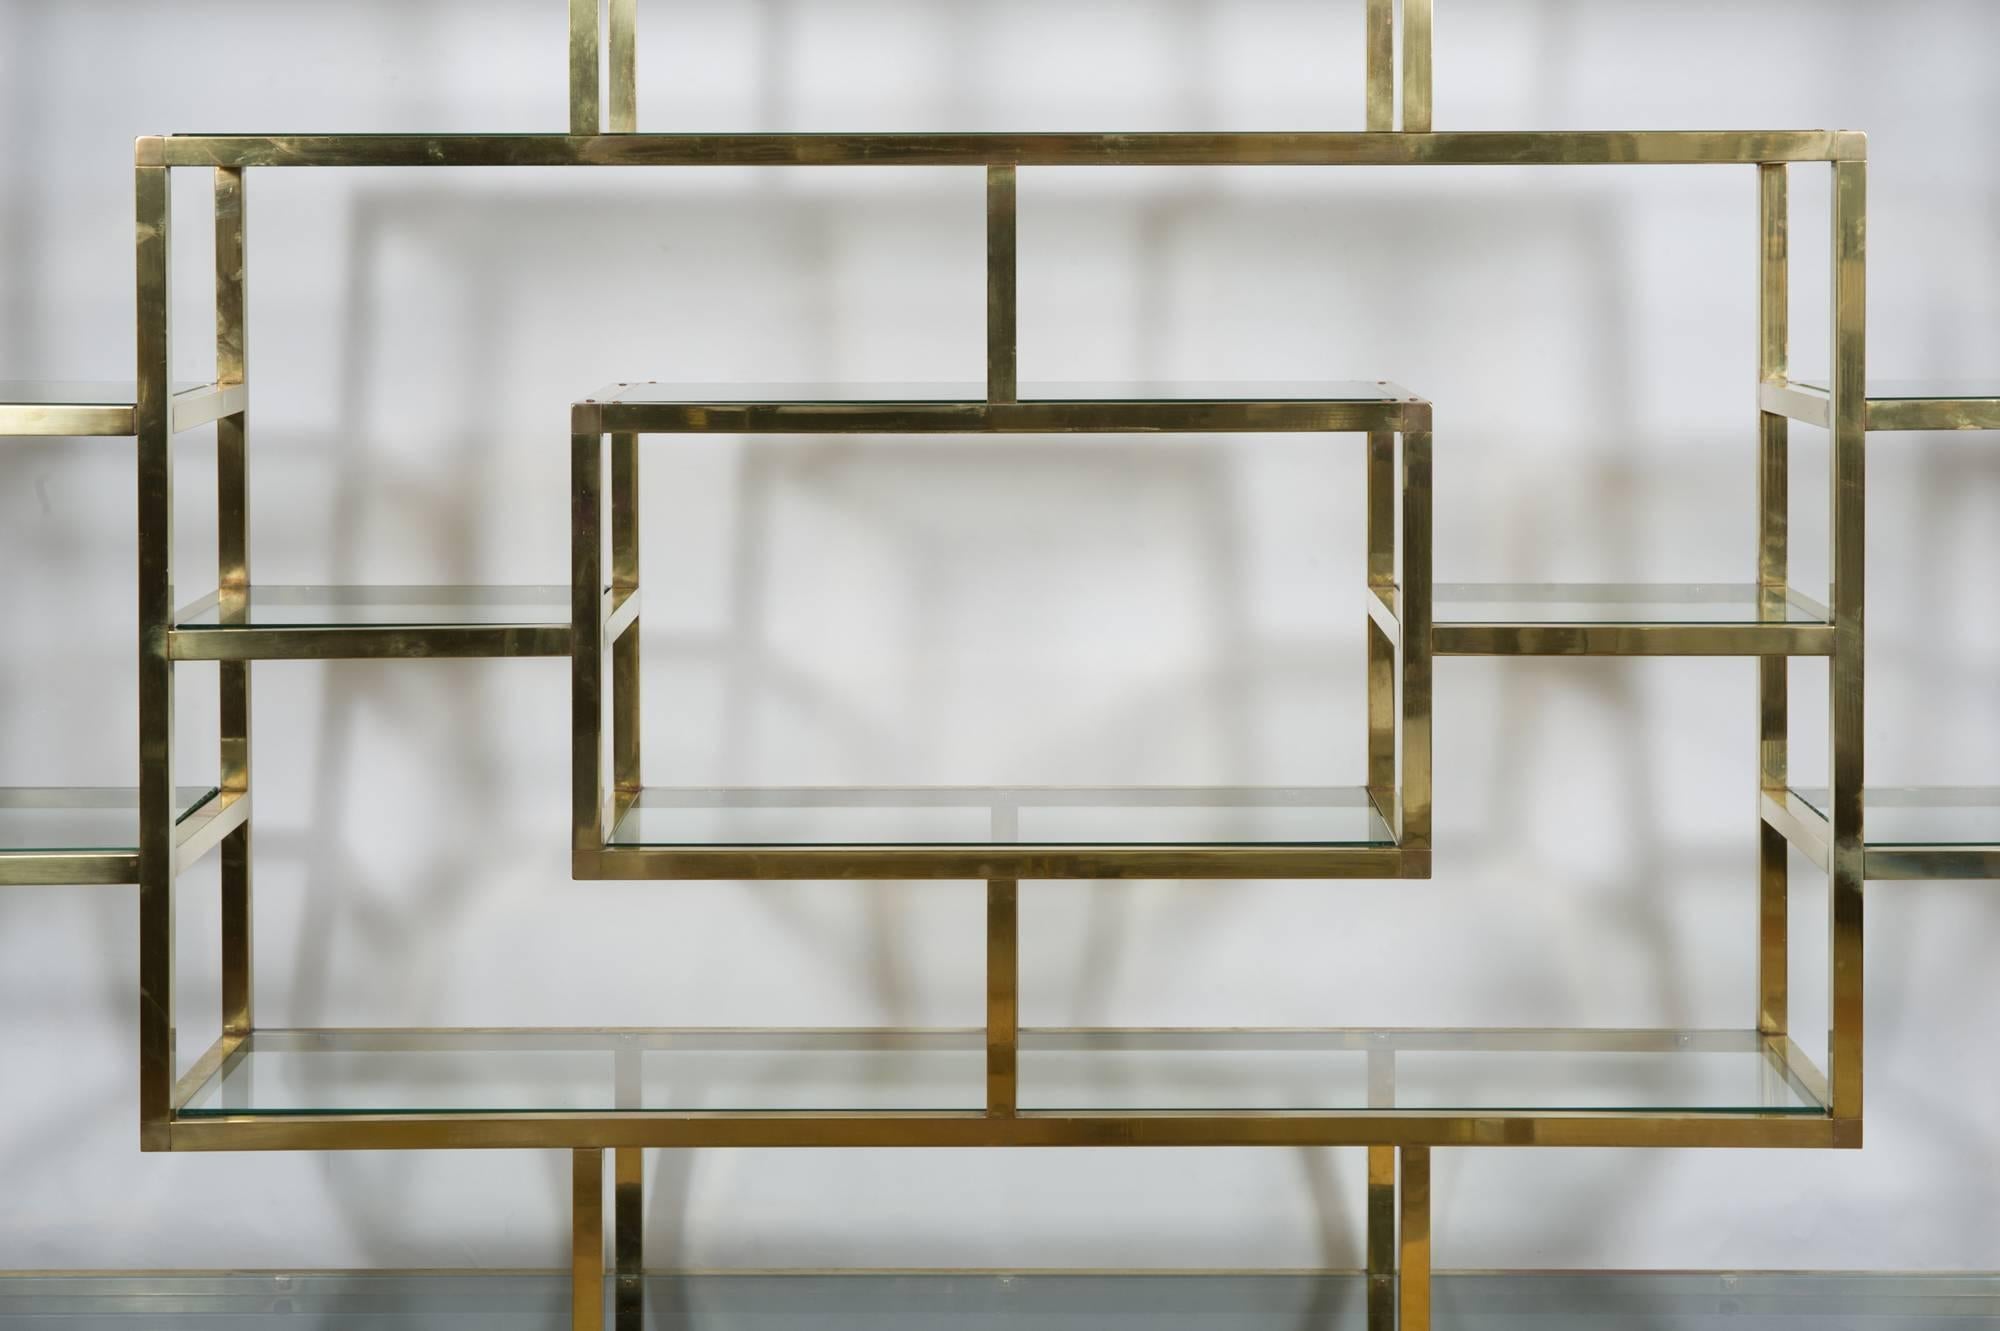 Wide symmetrical shelving system by Romeo Rega. Polished brass frame with clear glass shelves sit on black lacquered base. Would make a perfect bookcase, display shelving or floating room divider.